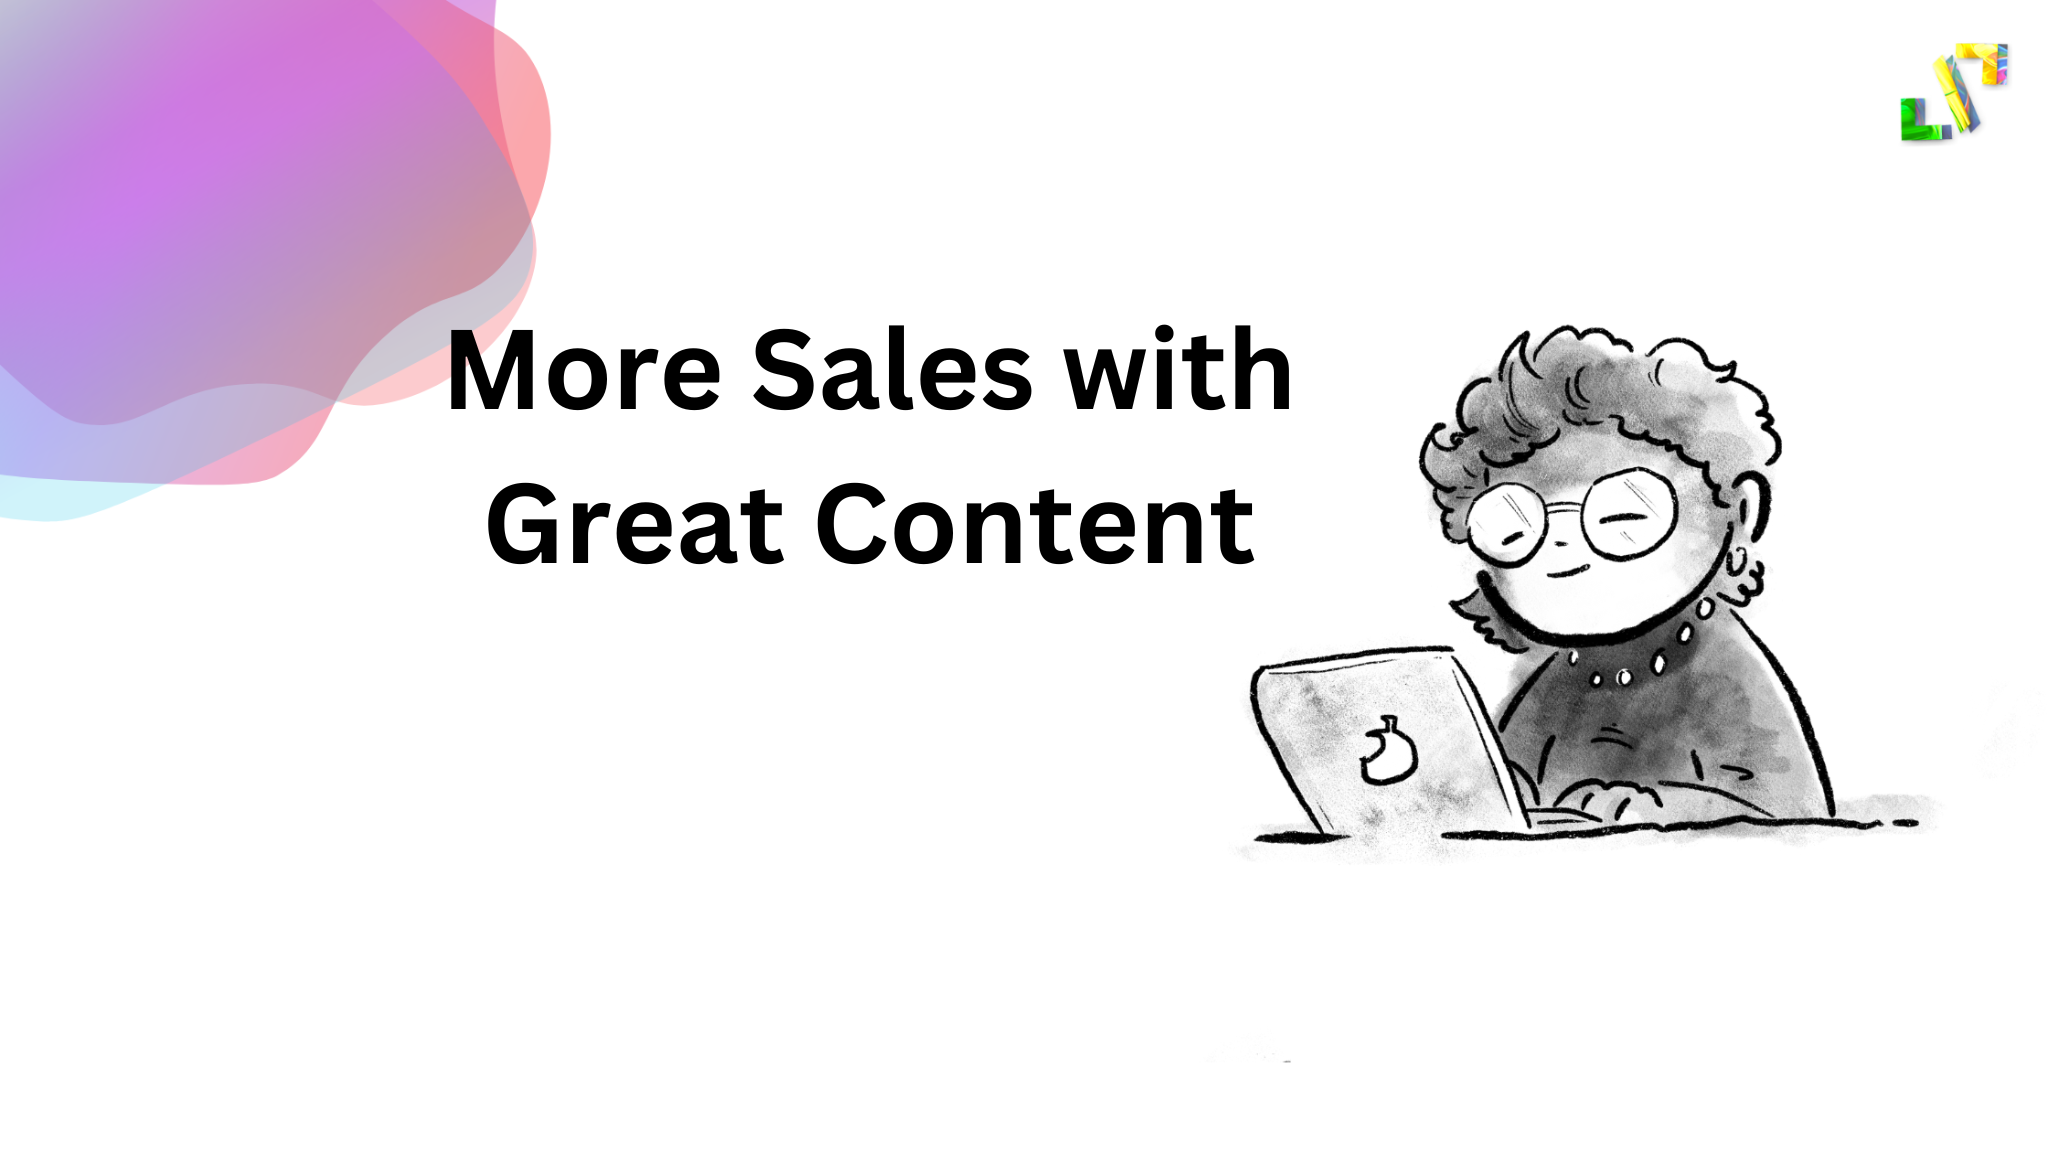 How to generate more sales with great content?